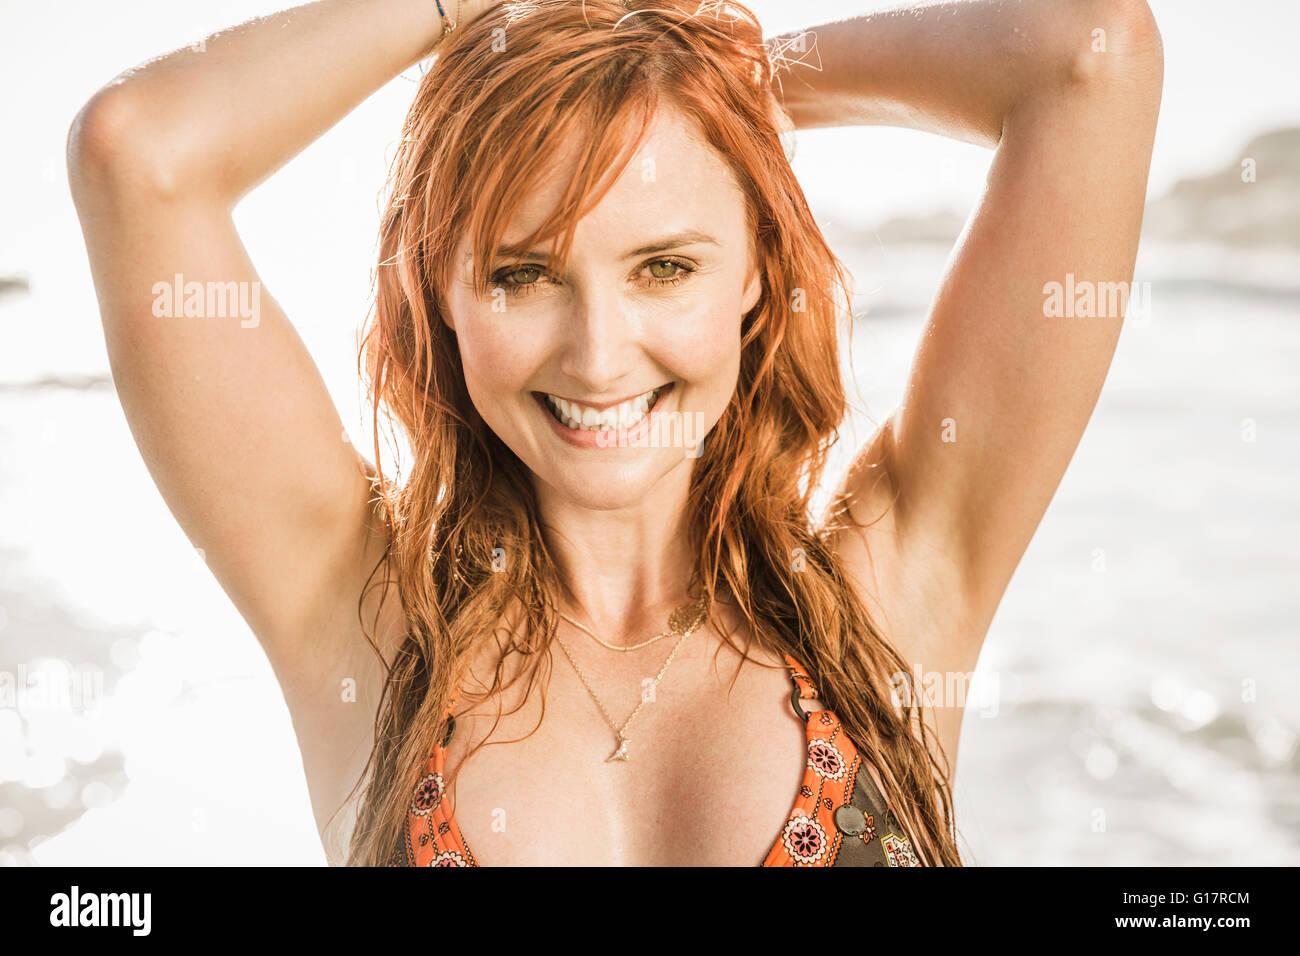 Portrait of woman with long red hair on beach, Cape Town, South Africa Stock Photo